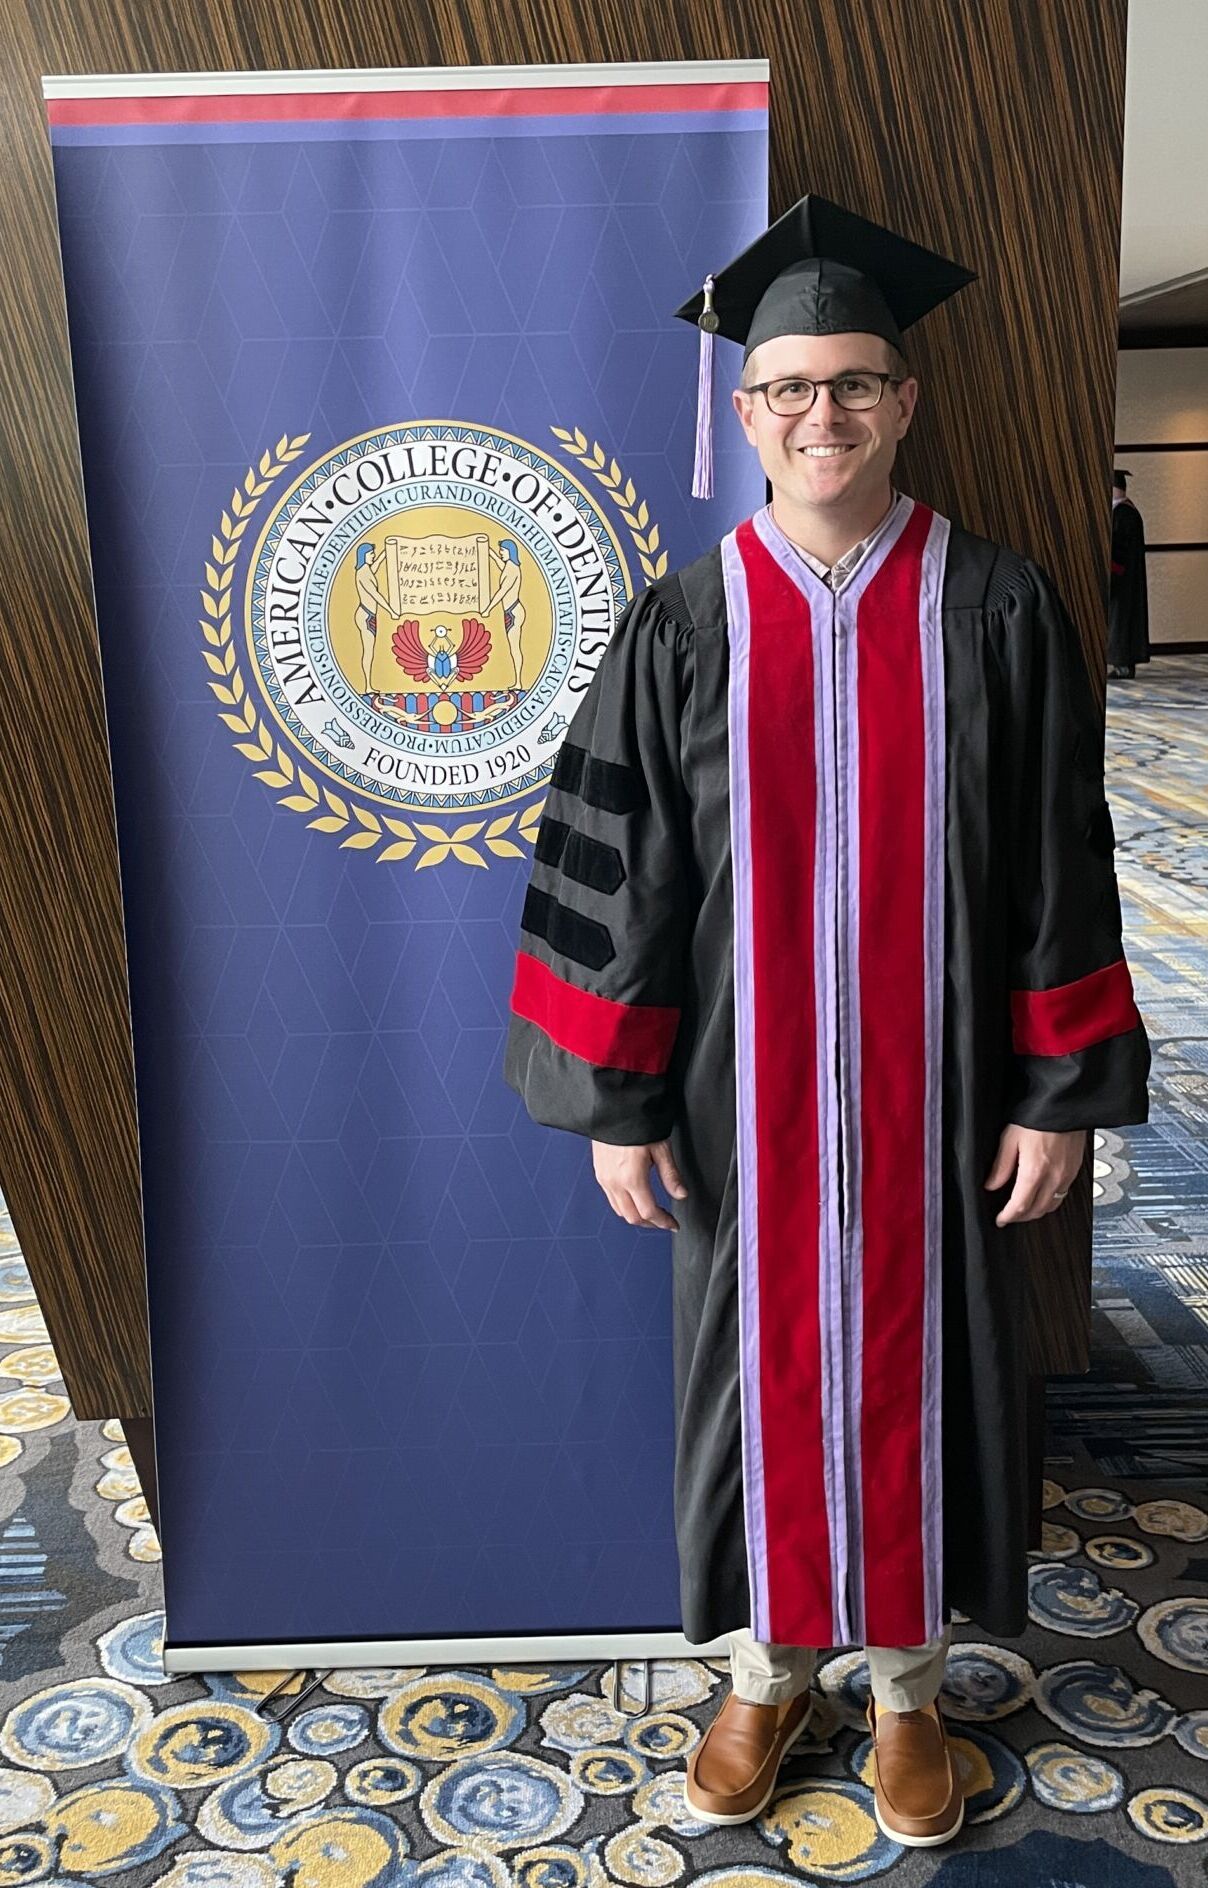 congratulations dr bumann on your Fall 2022 innduction! graduation picture